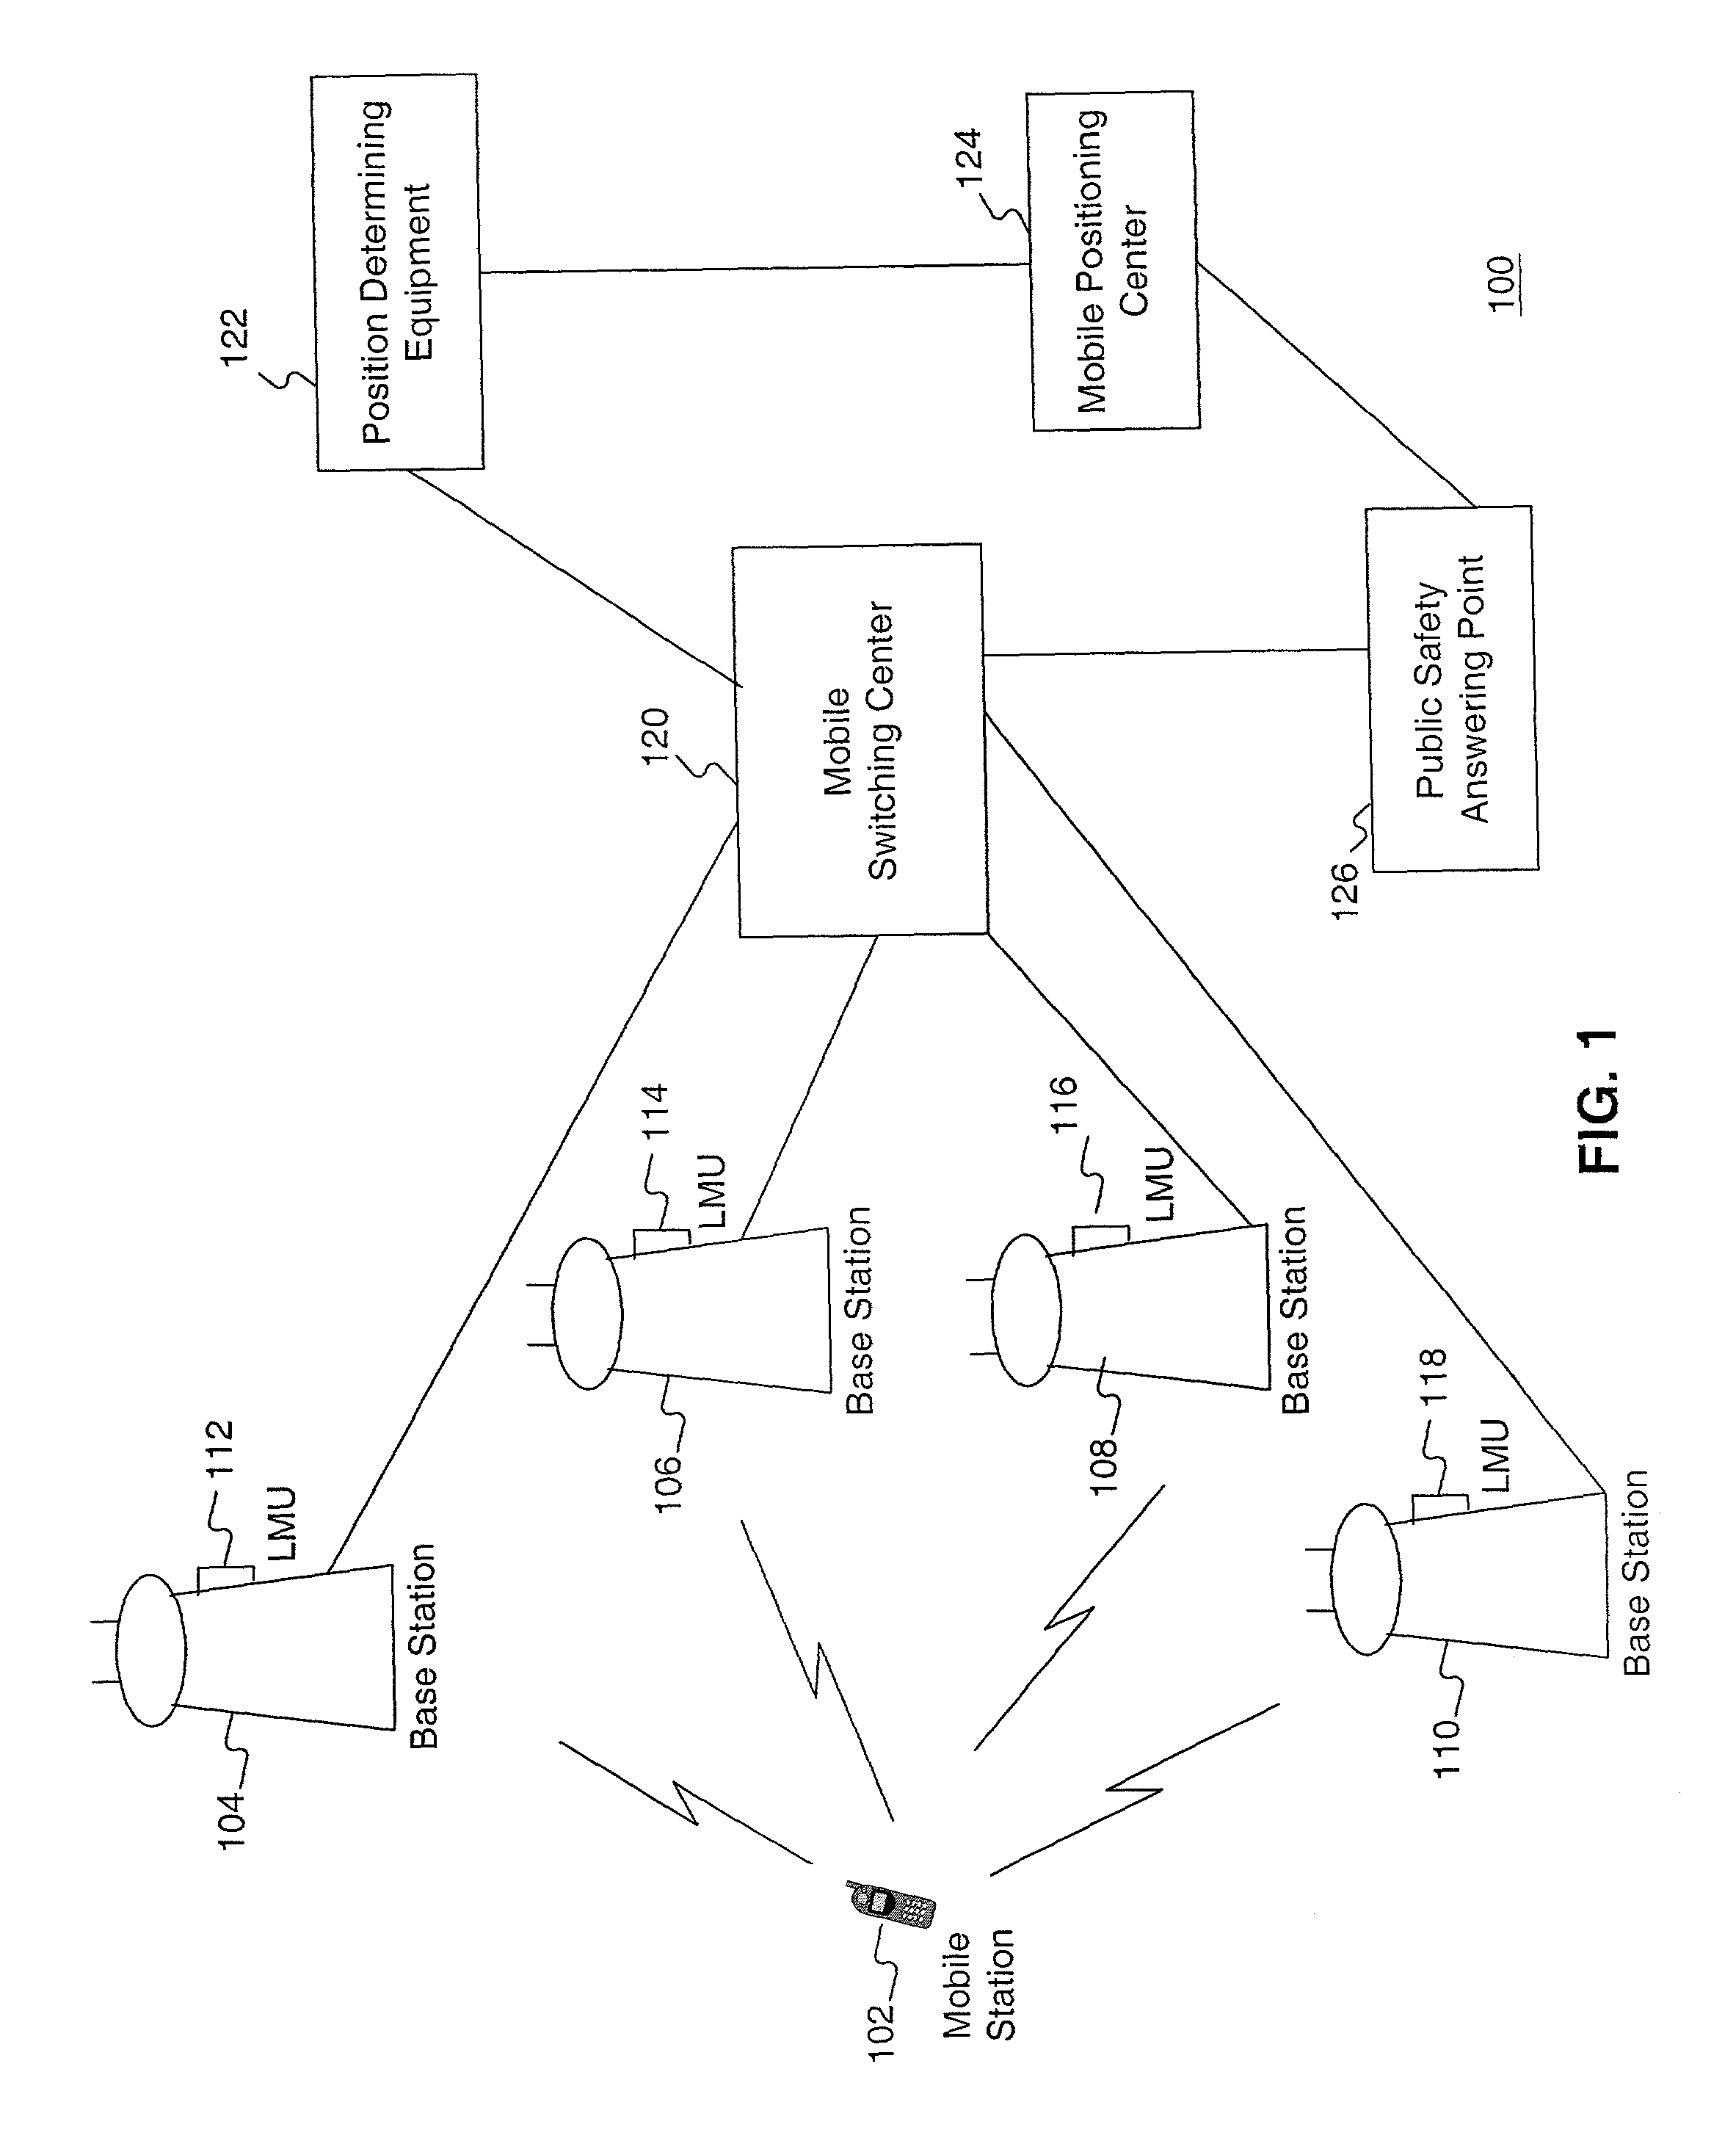 Method and system for mobile location detection using handoff information